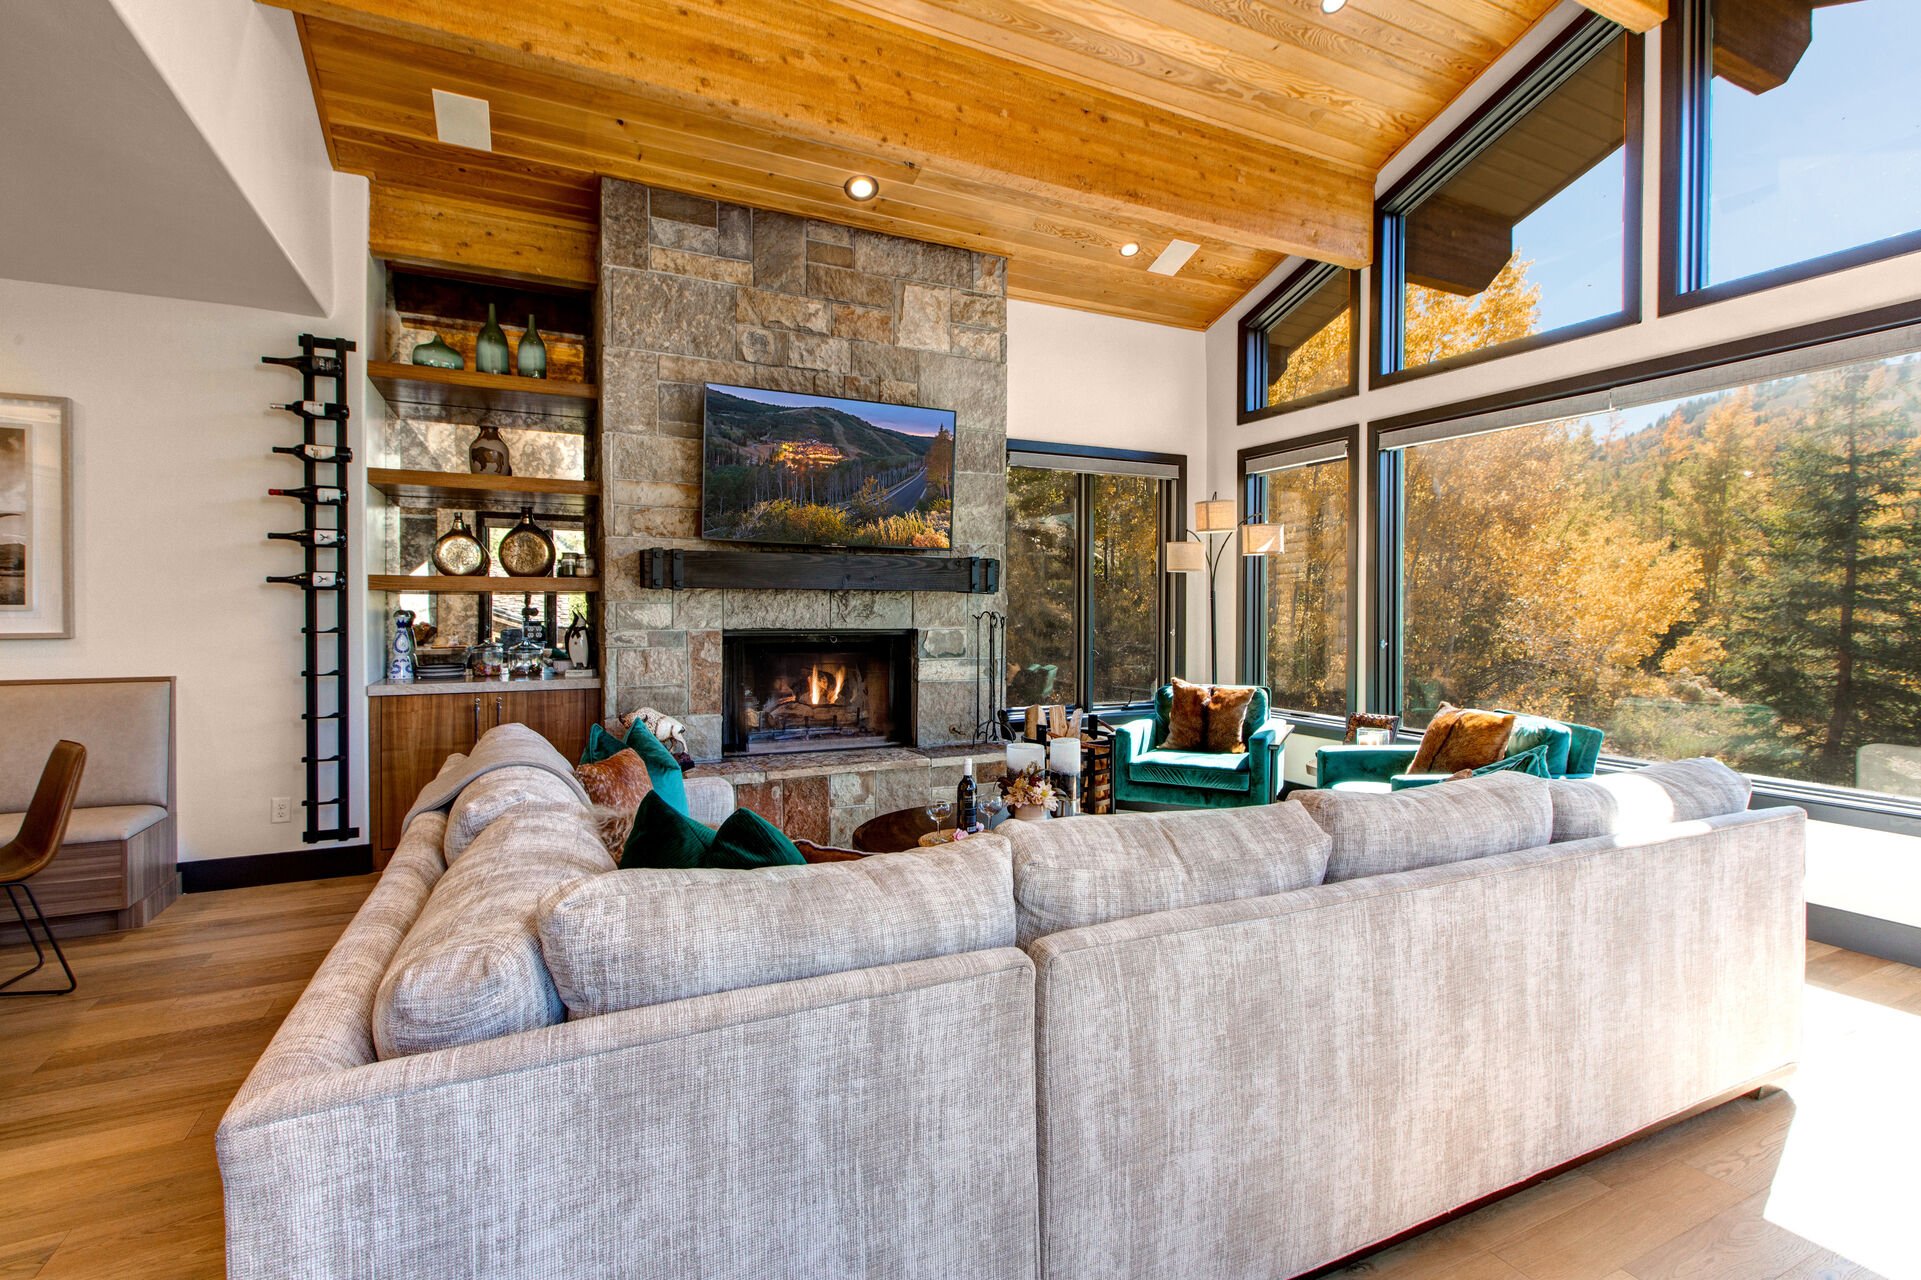 Living Room with plush sectional, gorgeous arm chairs, cozy gas fireplace, vaulted ceilings, floor to ceiling windows, Smart TV, and private deck access